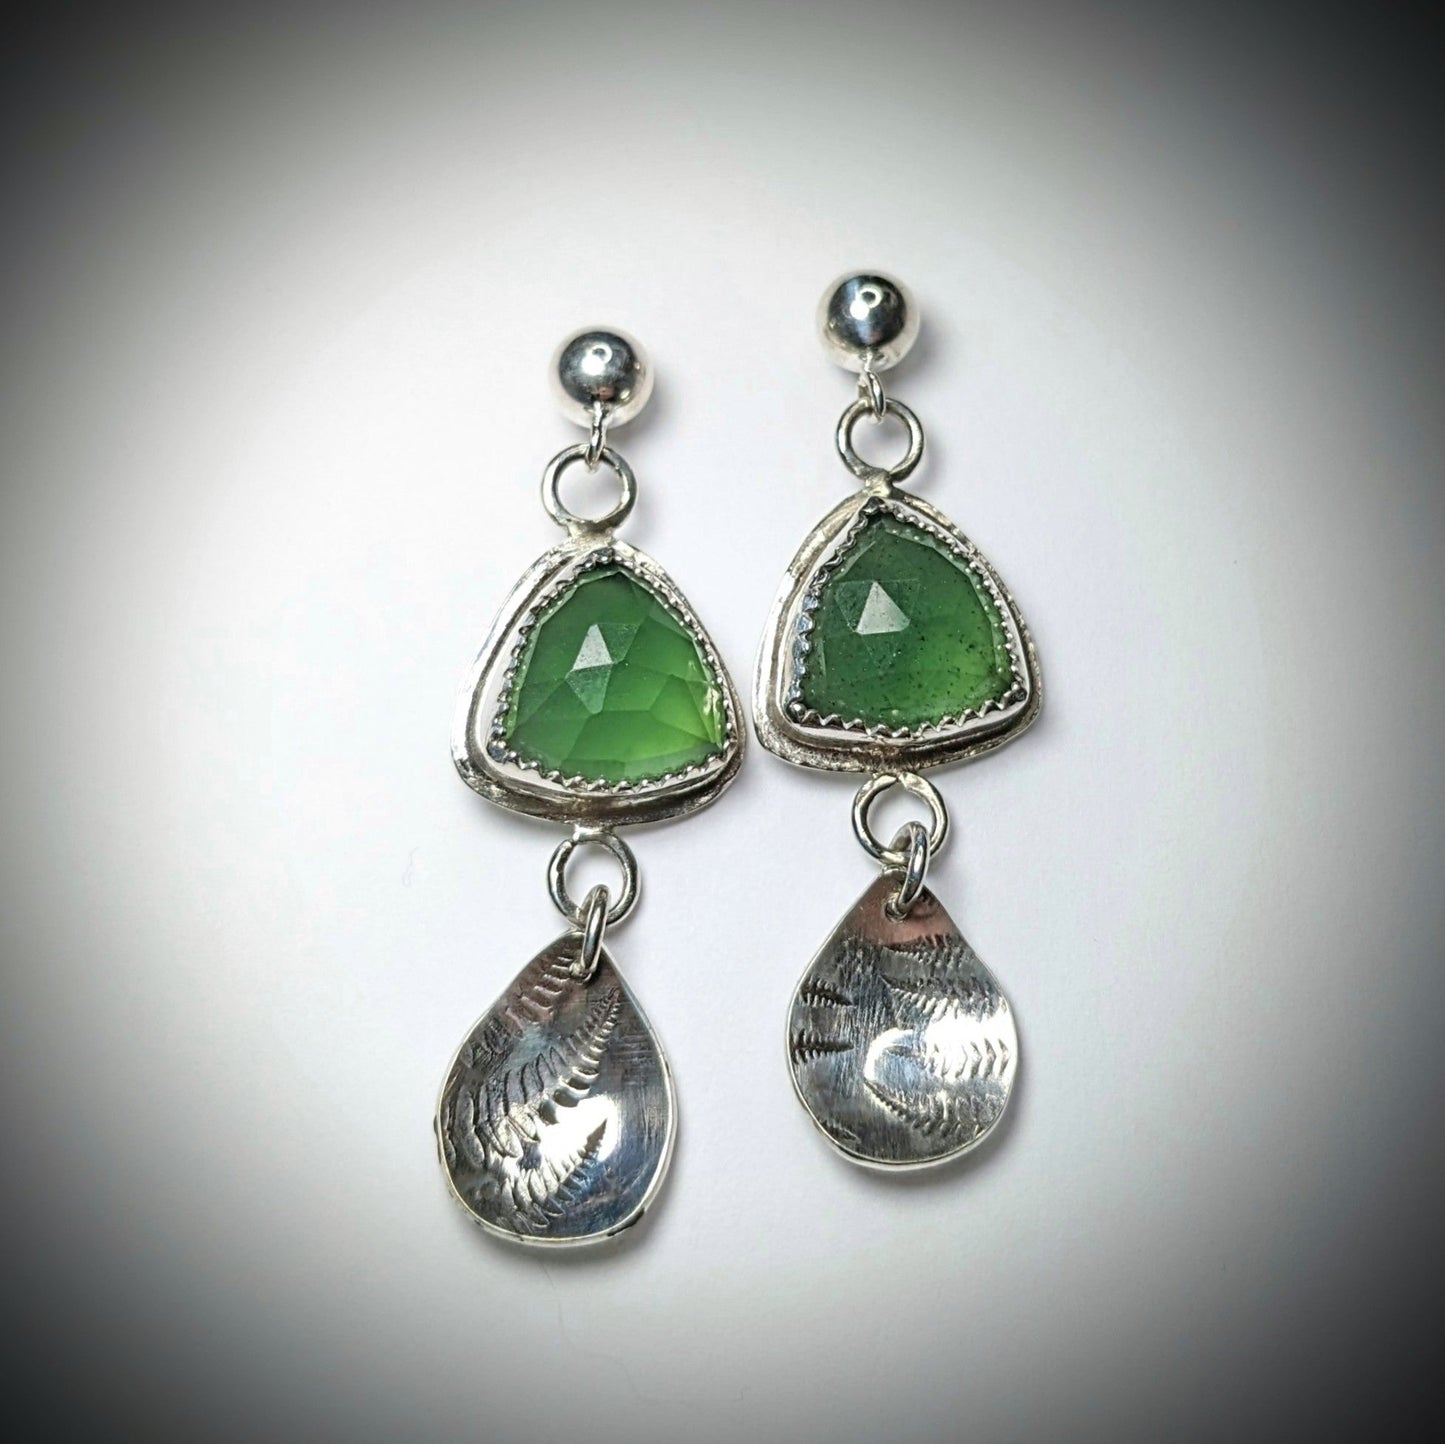 Serpentine and Ferns - Earrings No.1